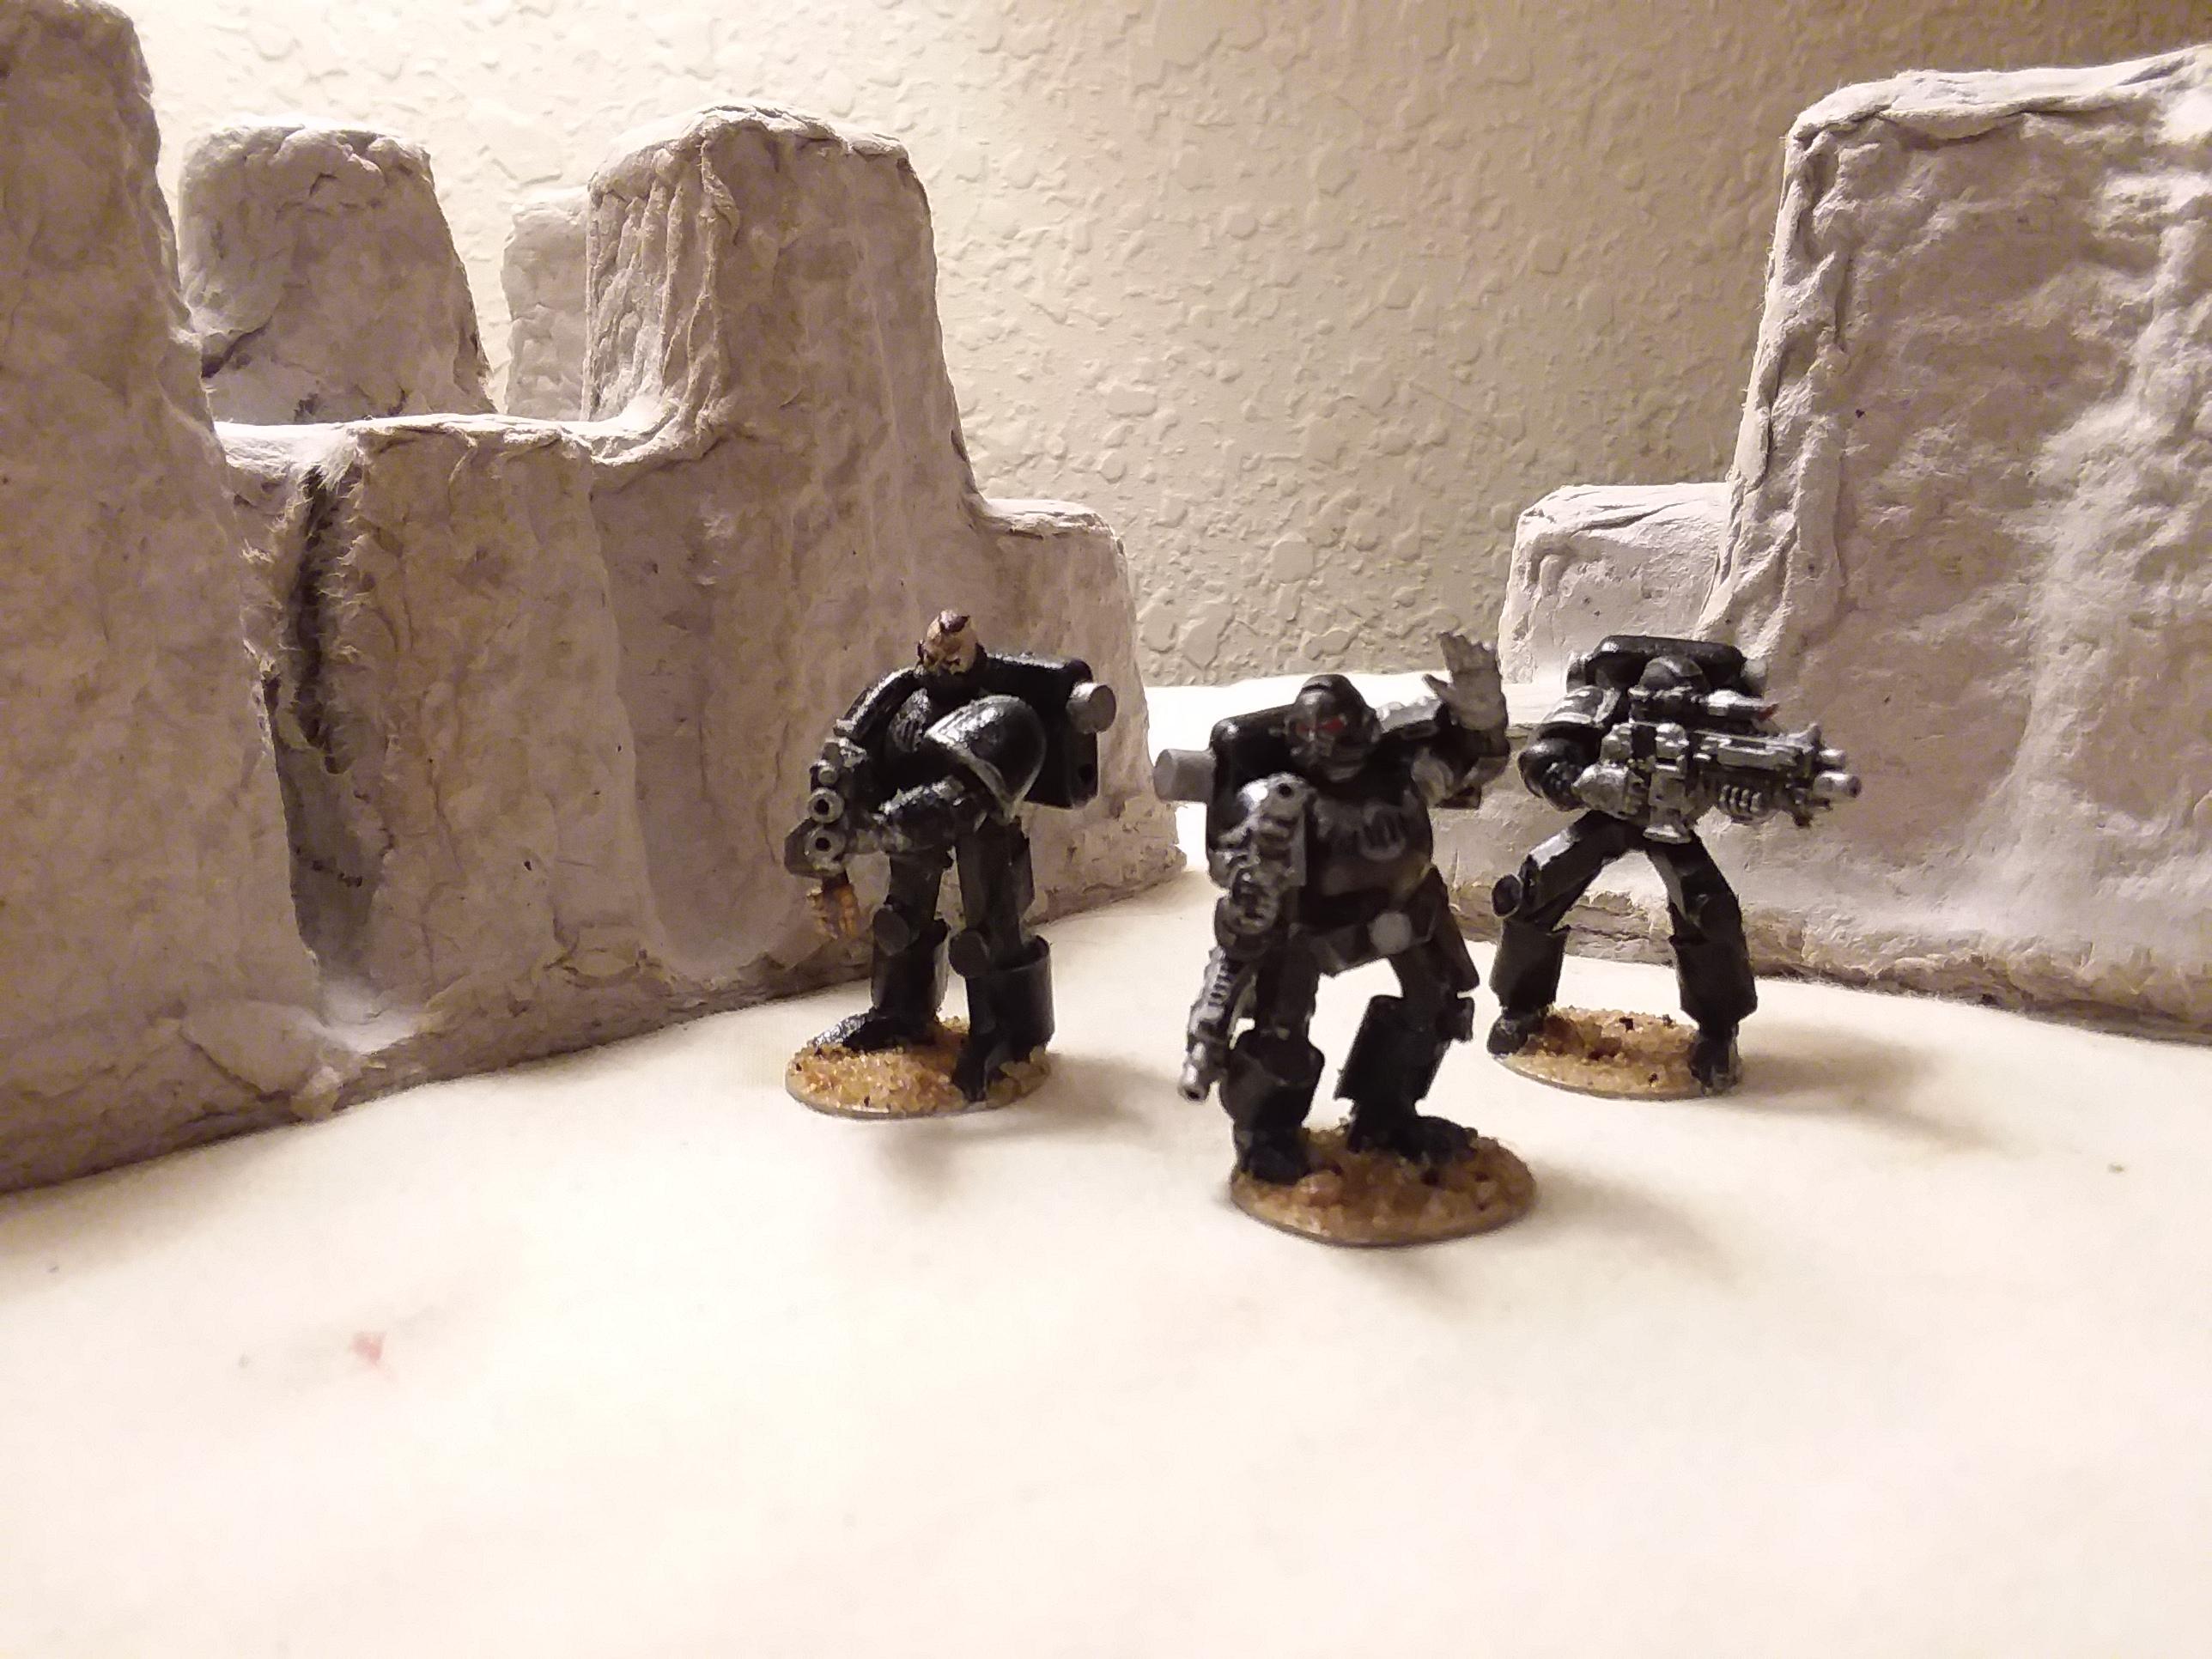 Bead, Beadmarines, Beads, Bits, Build, Conversion, Figures, Hands, Iron, Ironhands, Kitbash, Scratch, Scratch Build, Space, Space Marines, Sprues